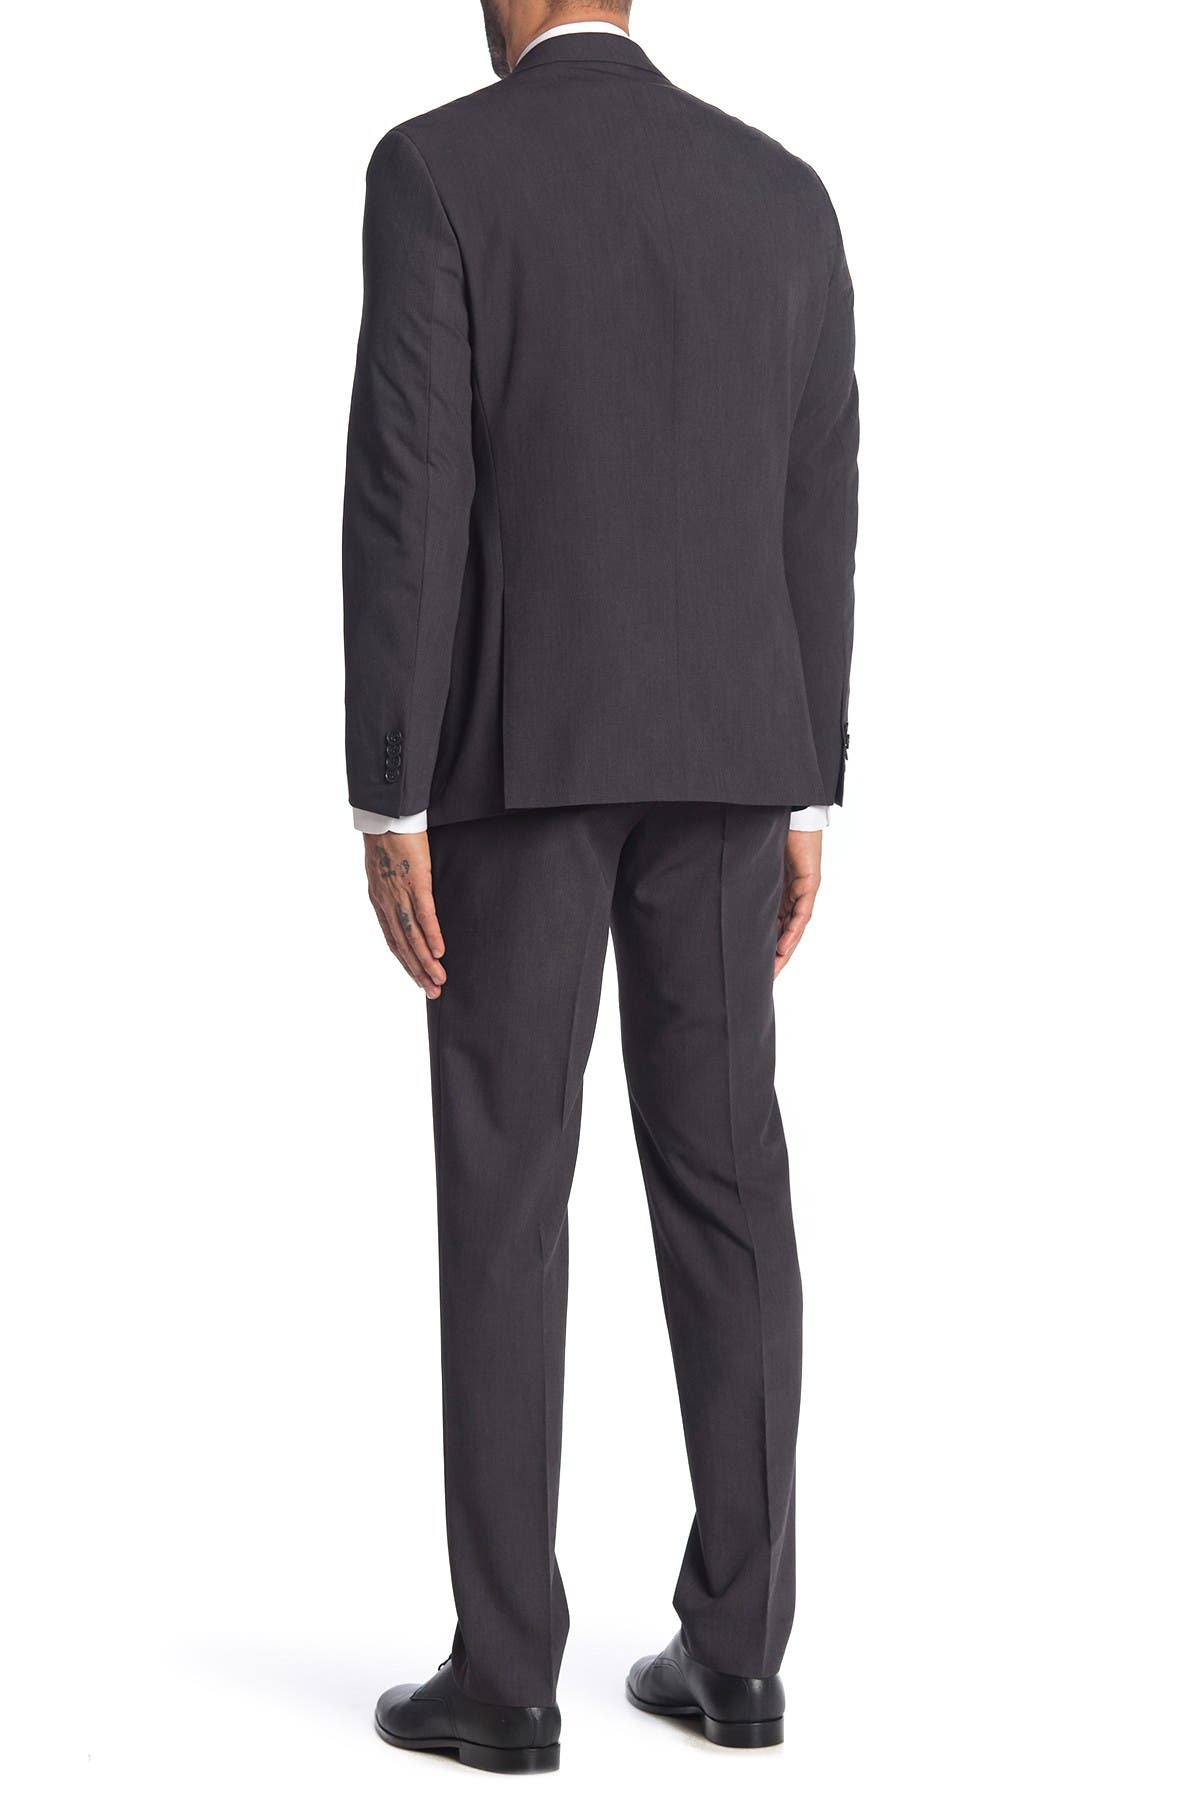 Kenneth Cole Reaction Solid Grey 2-piece Trim Fit Suit In Charcoal2